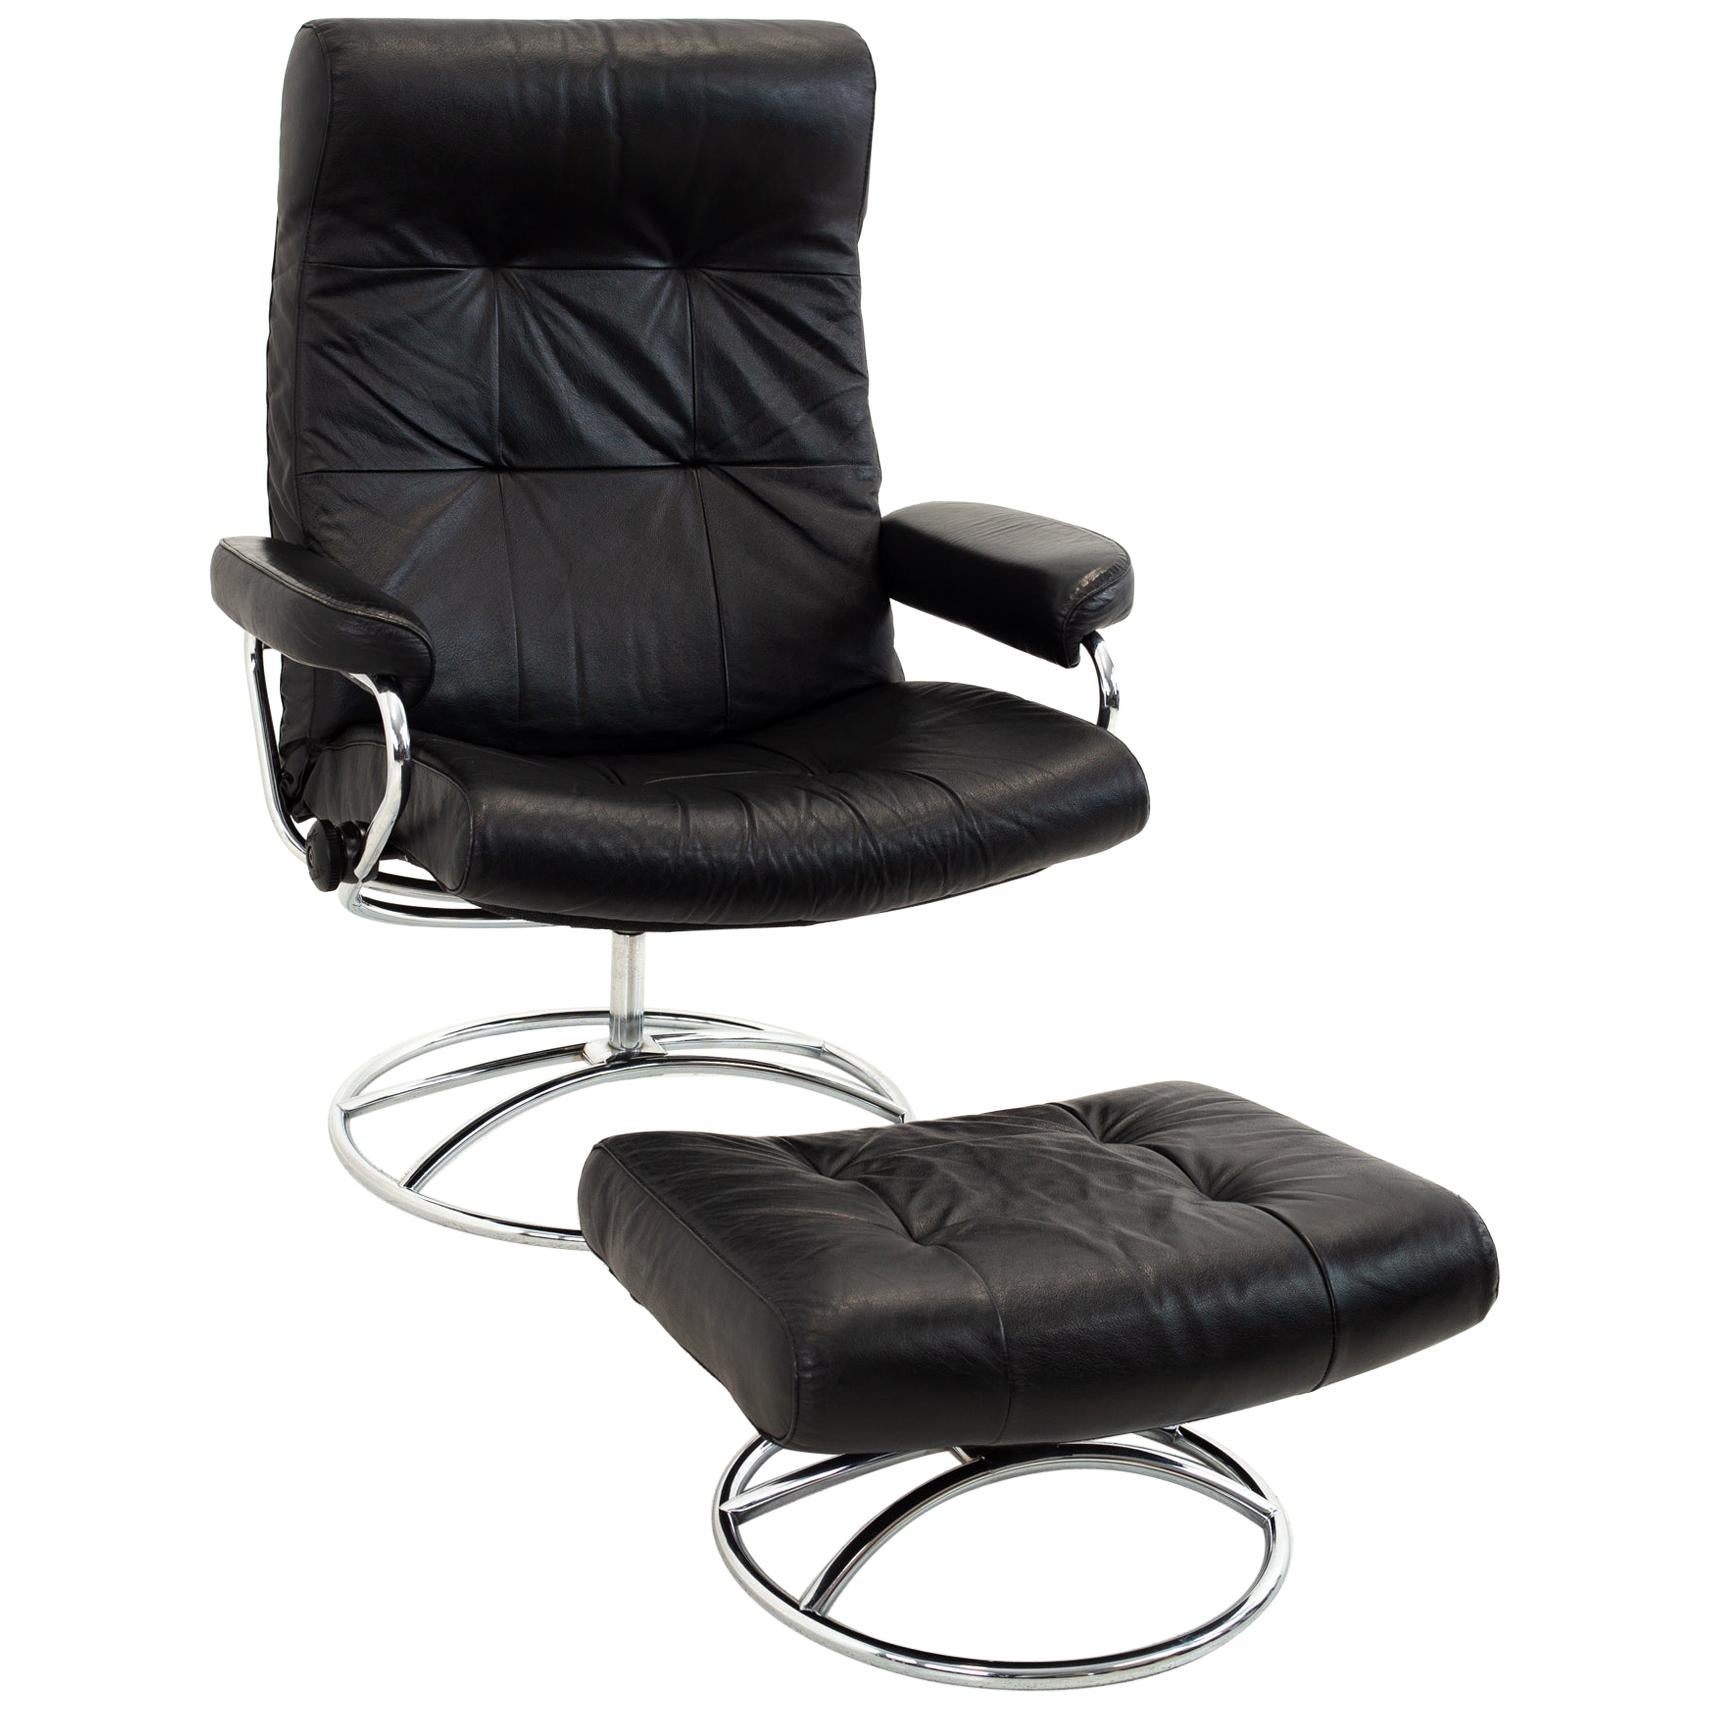 Ekornes Mid Century Black and Chrome Lounge Chair and Ottoman